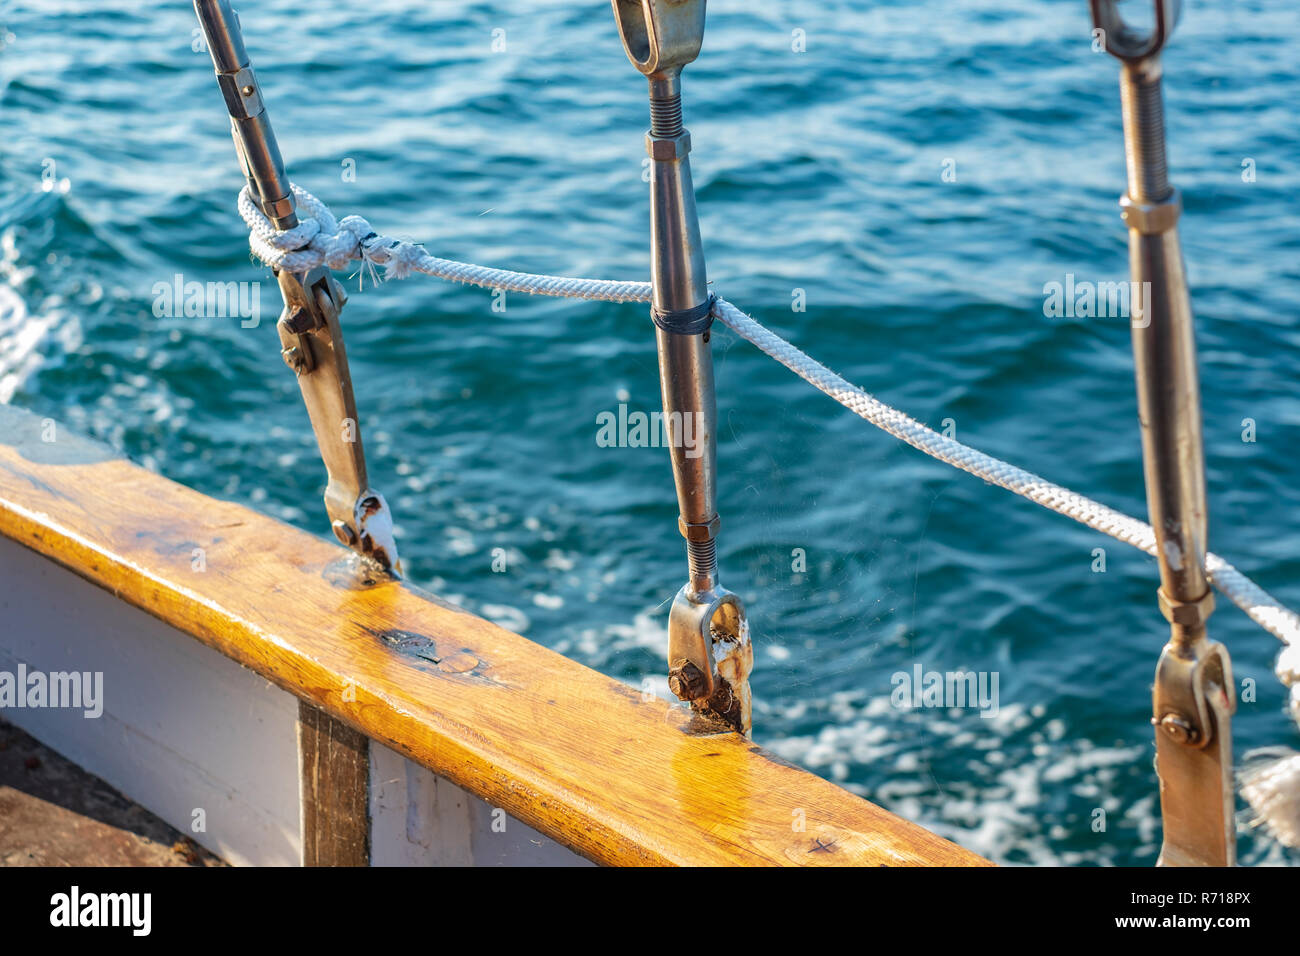 The details of the rigging of a sailing cutter create a maritime atmosphere. Stock Photo